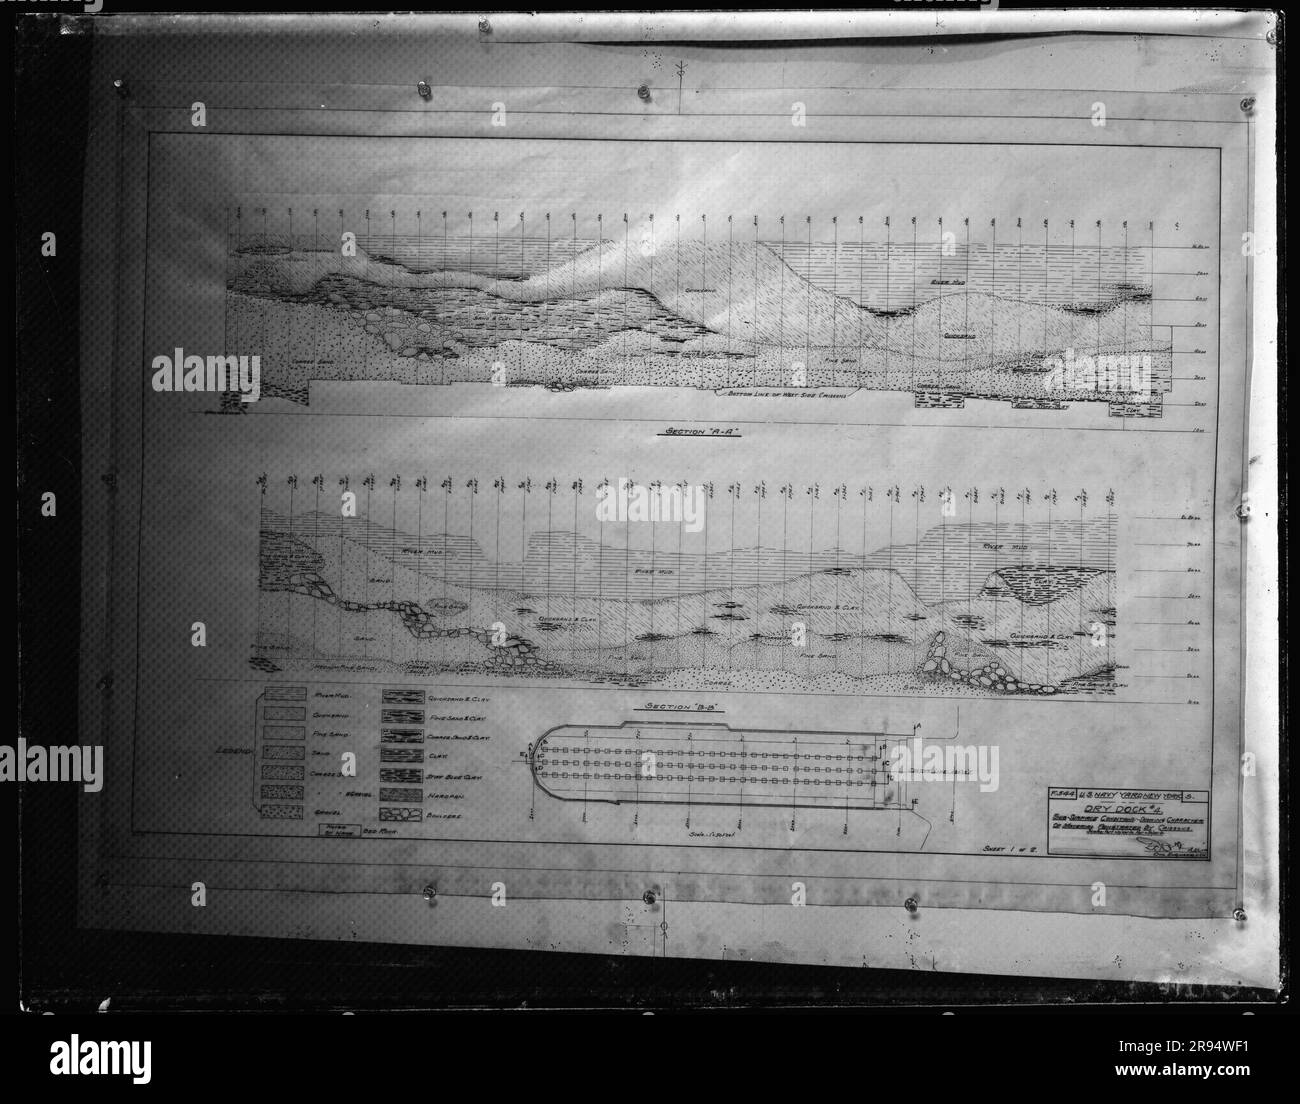 Drawing: US Navy Yard, New York, Dry Dock Number 4, Sub-Surface Conditions, Showing Character of Material Penetrated by Caissons. Glass Plate Negatives of the Construction and Repair of Buildings, Facilities, and Vessels at the New York Navy Yard. Stock Photo